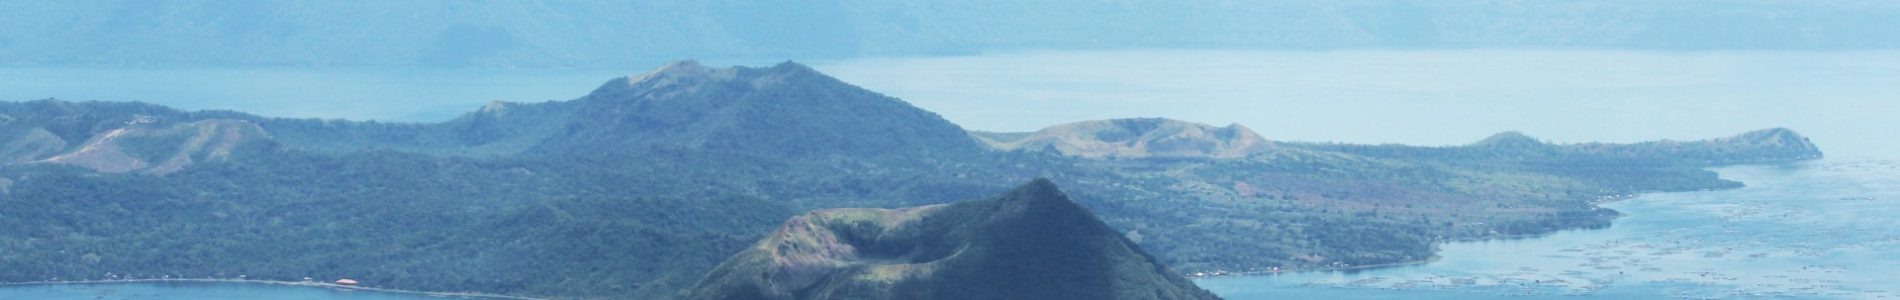 Photograph of Taal volcano